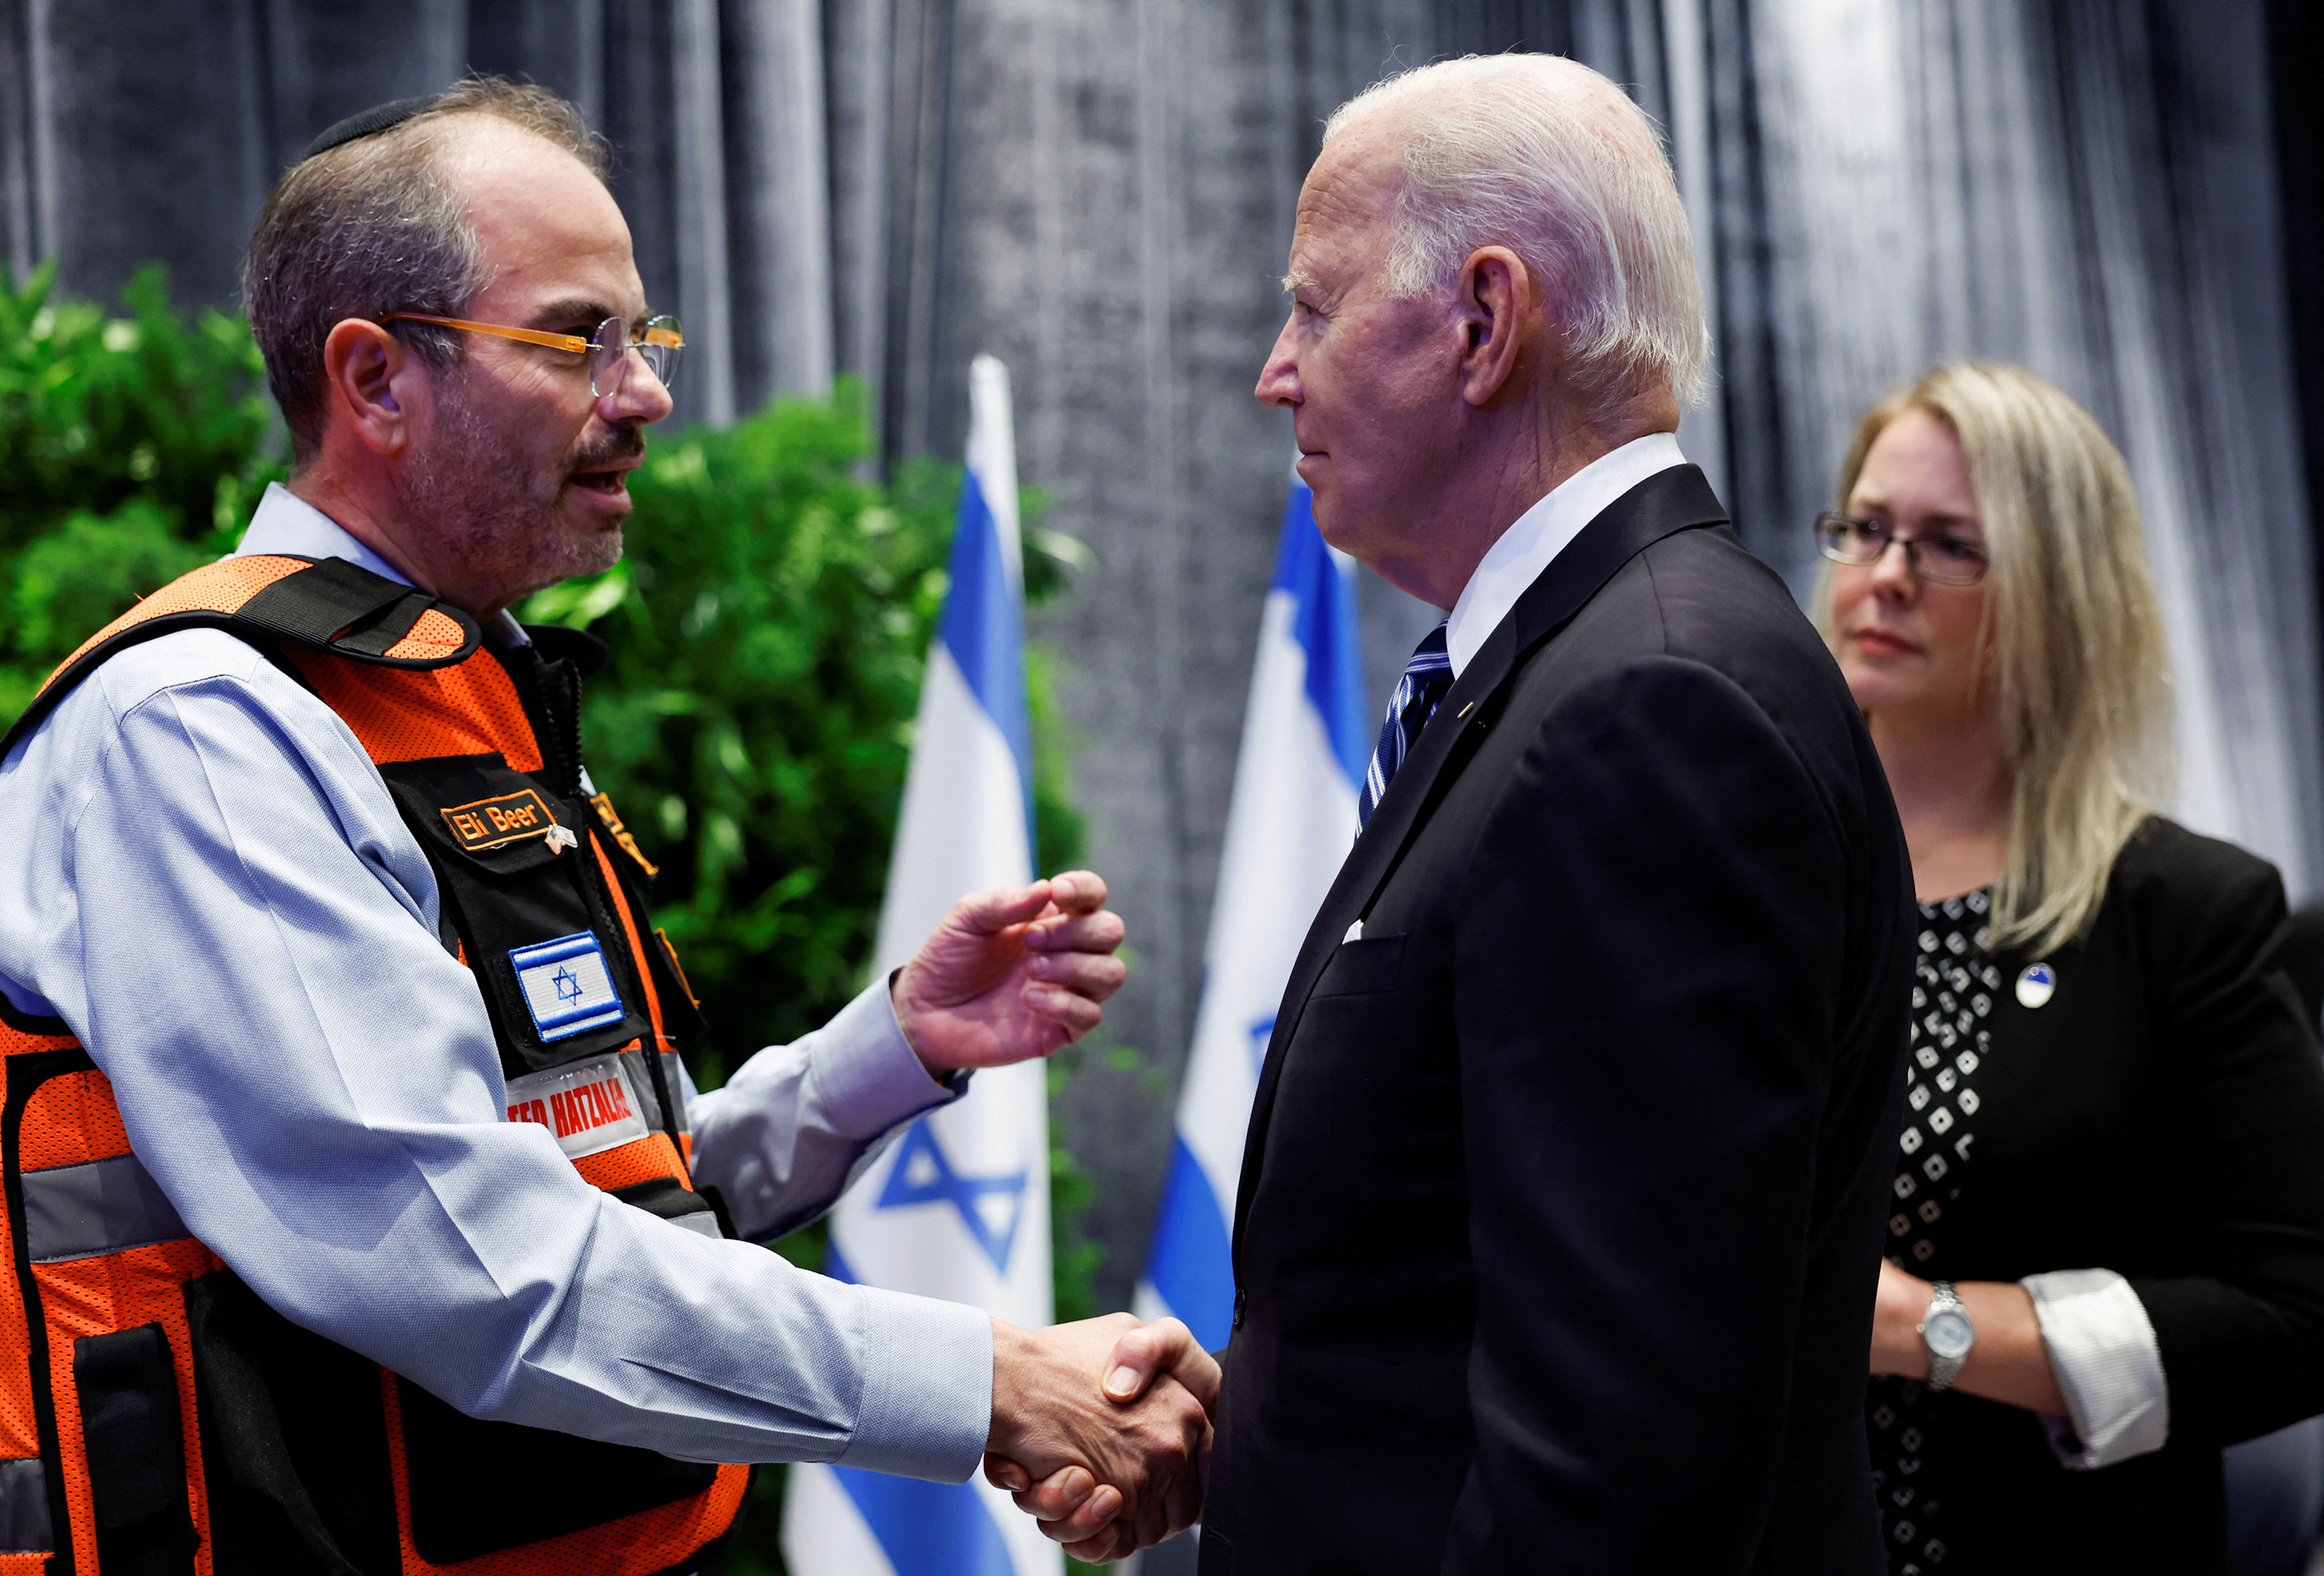 President Joe Biden shakes hands with Eli Beer during a meeting with Israeli first responders, family members and other Israeli citizens in Tel Aviv, Israel, on Wednesday.